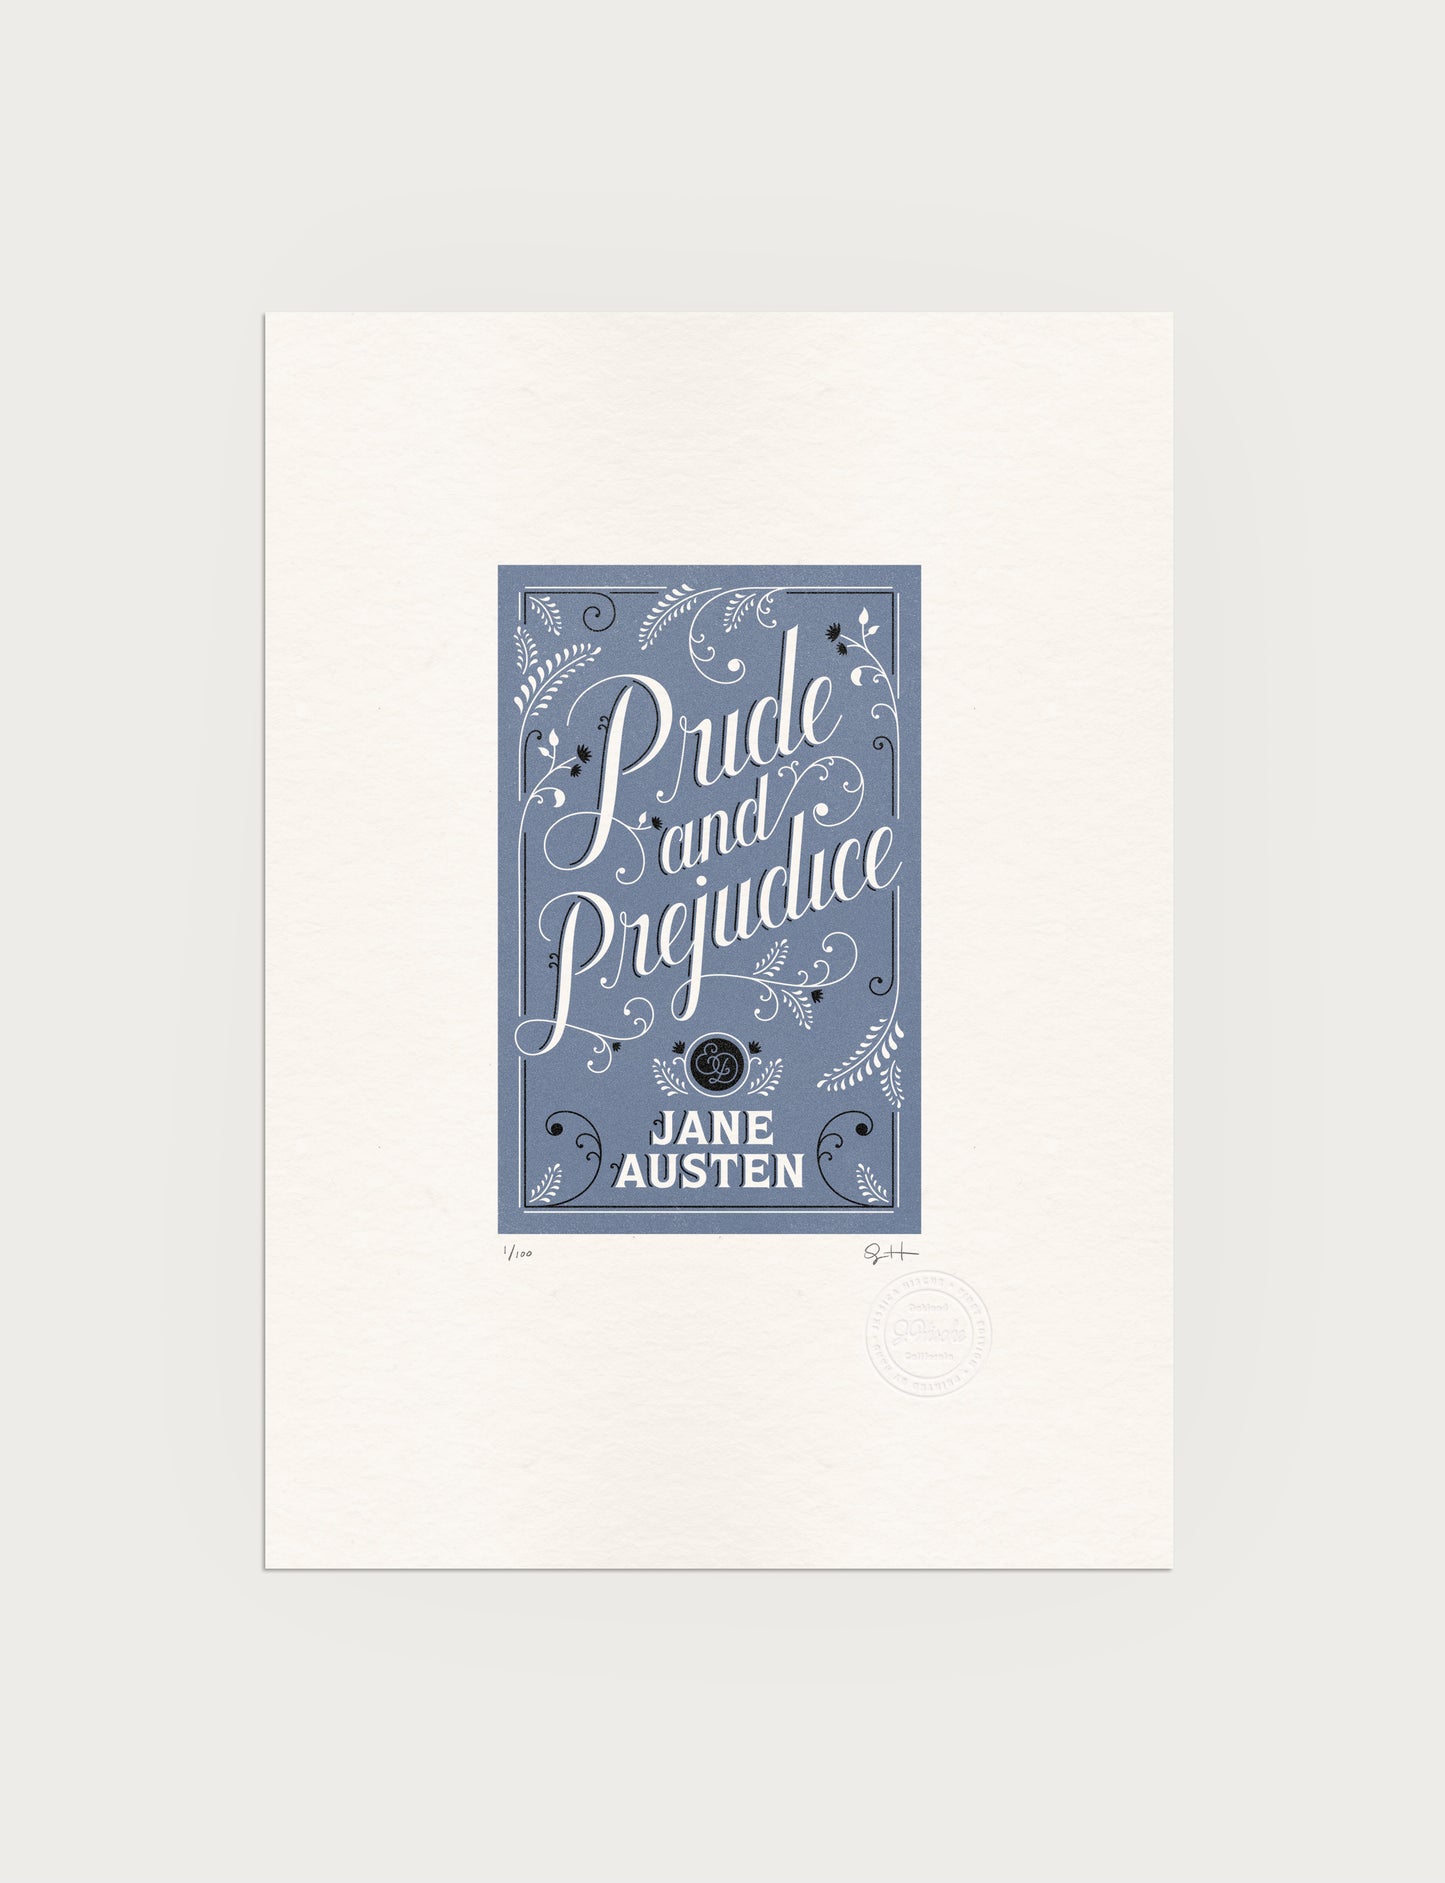 2-color letterpress print in blue and black. Printed artwork is an illustrated book cover of Pride and Prejudice including custom hand lettering.